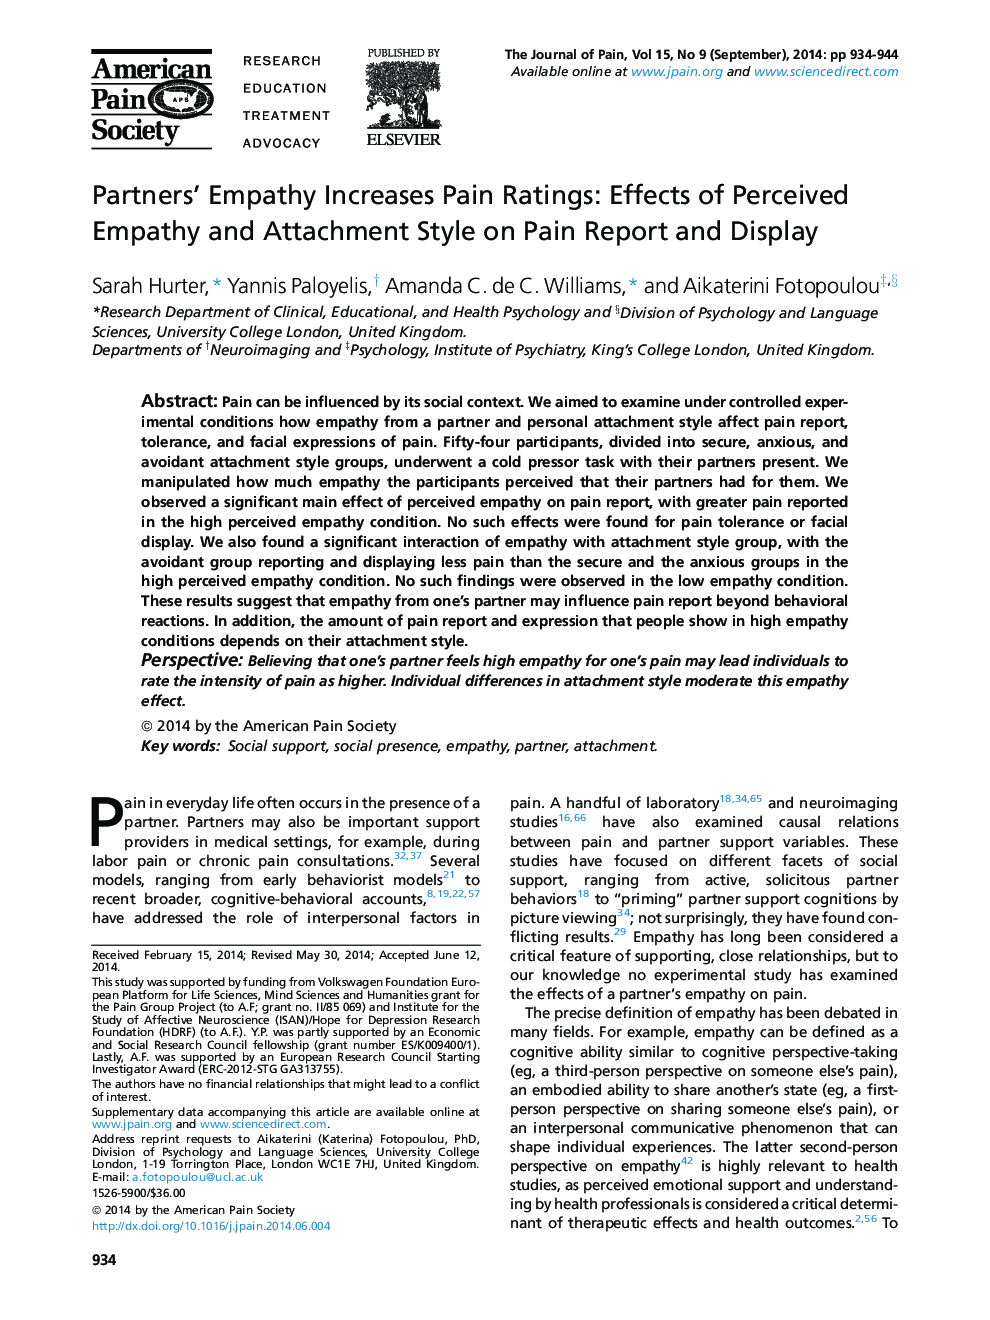 Original ReportPartners' Empathy Increases Pain Ratings: Effects of Perceived Empathy and Attachment Style on Pain Report and Display